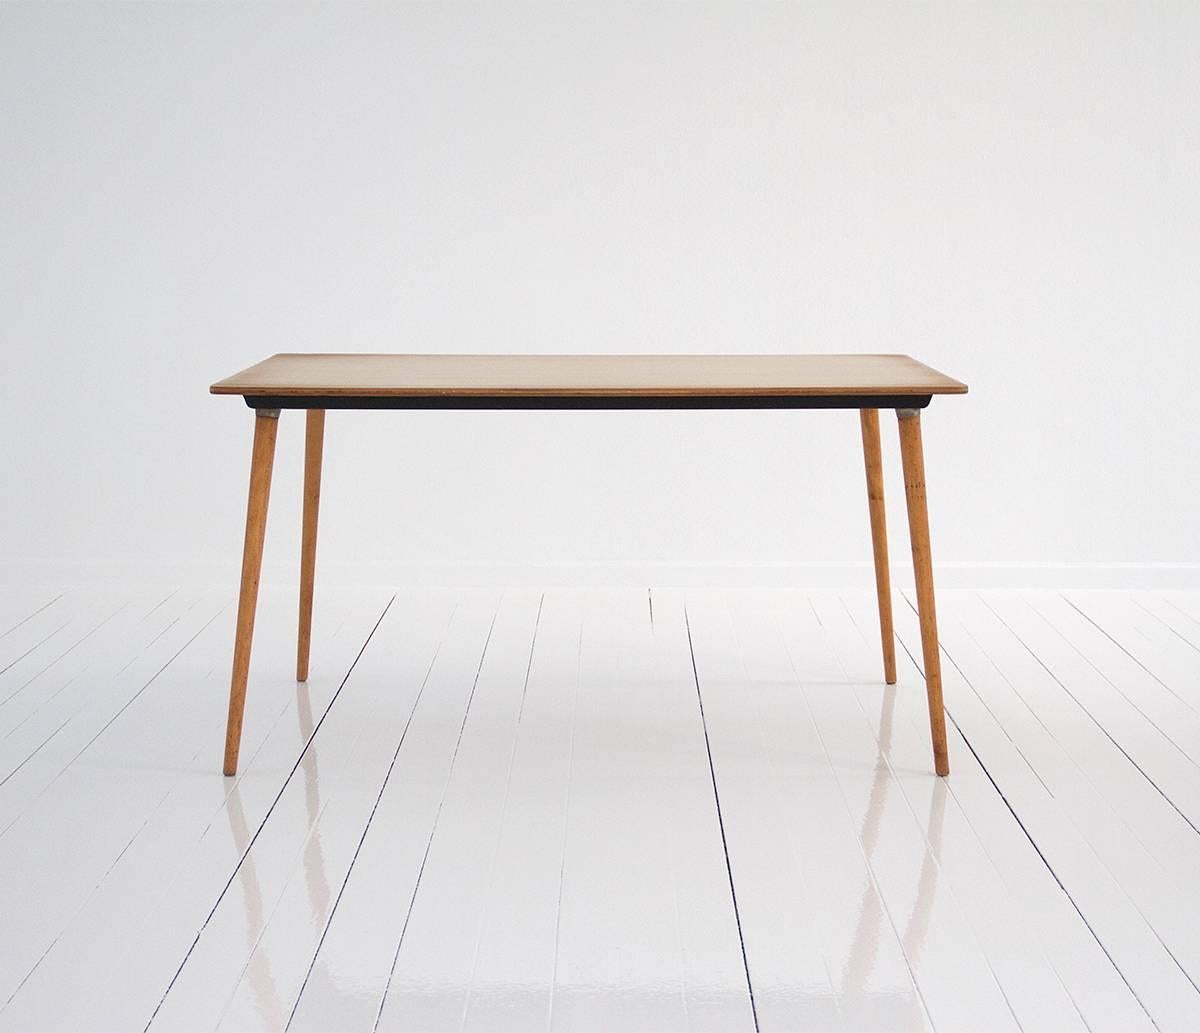 American Rare Table Designed by Charles and Ray Eames, Birchwood, 1940s, United States For Sale